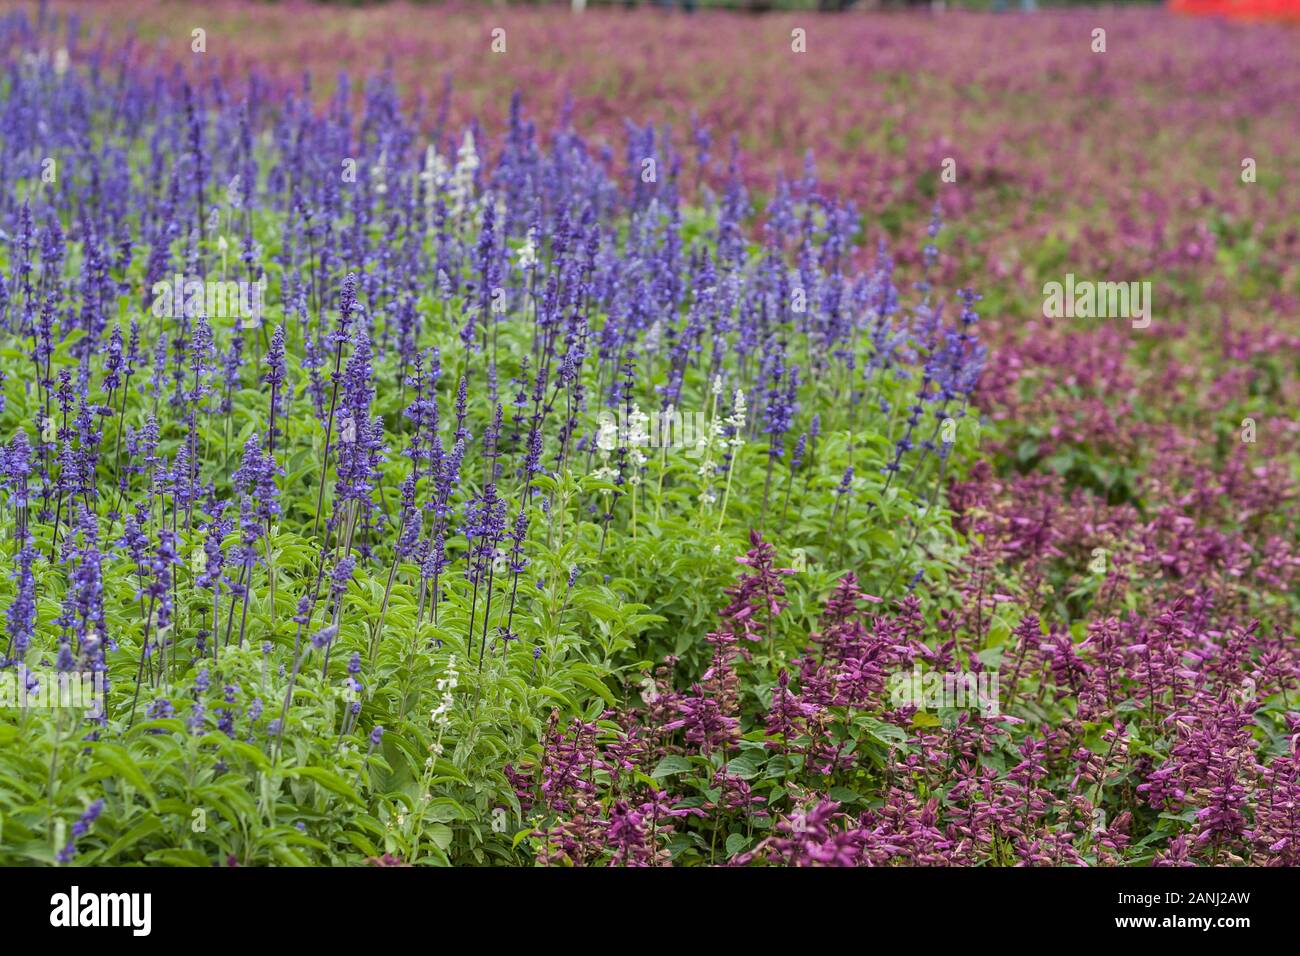 Mealy sage (Salvia farinacea 'Victoria'), aka mealycup sage, intense violet-blue flowers, in a dense stand, Sea of Flowers, Xinshe, Taichung, Taiwan Stock Photo